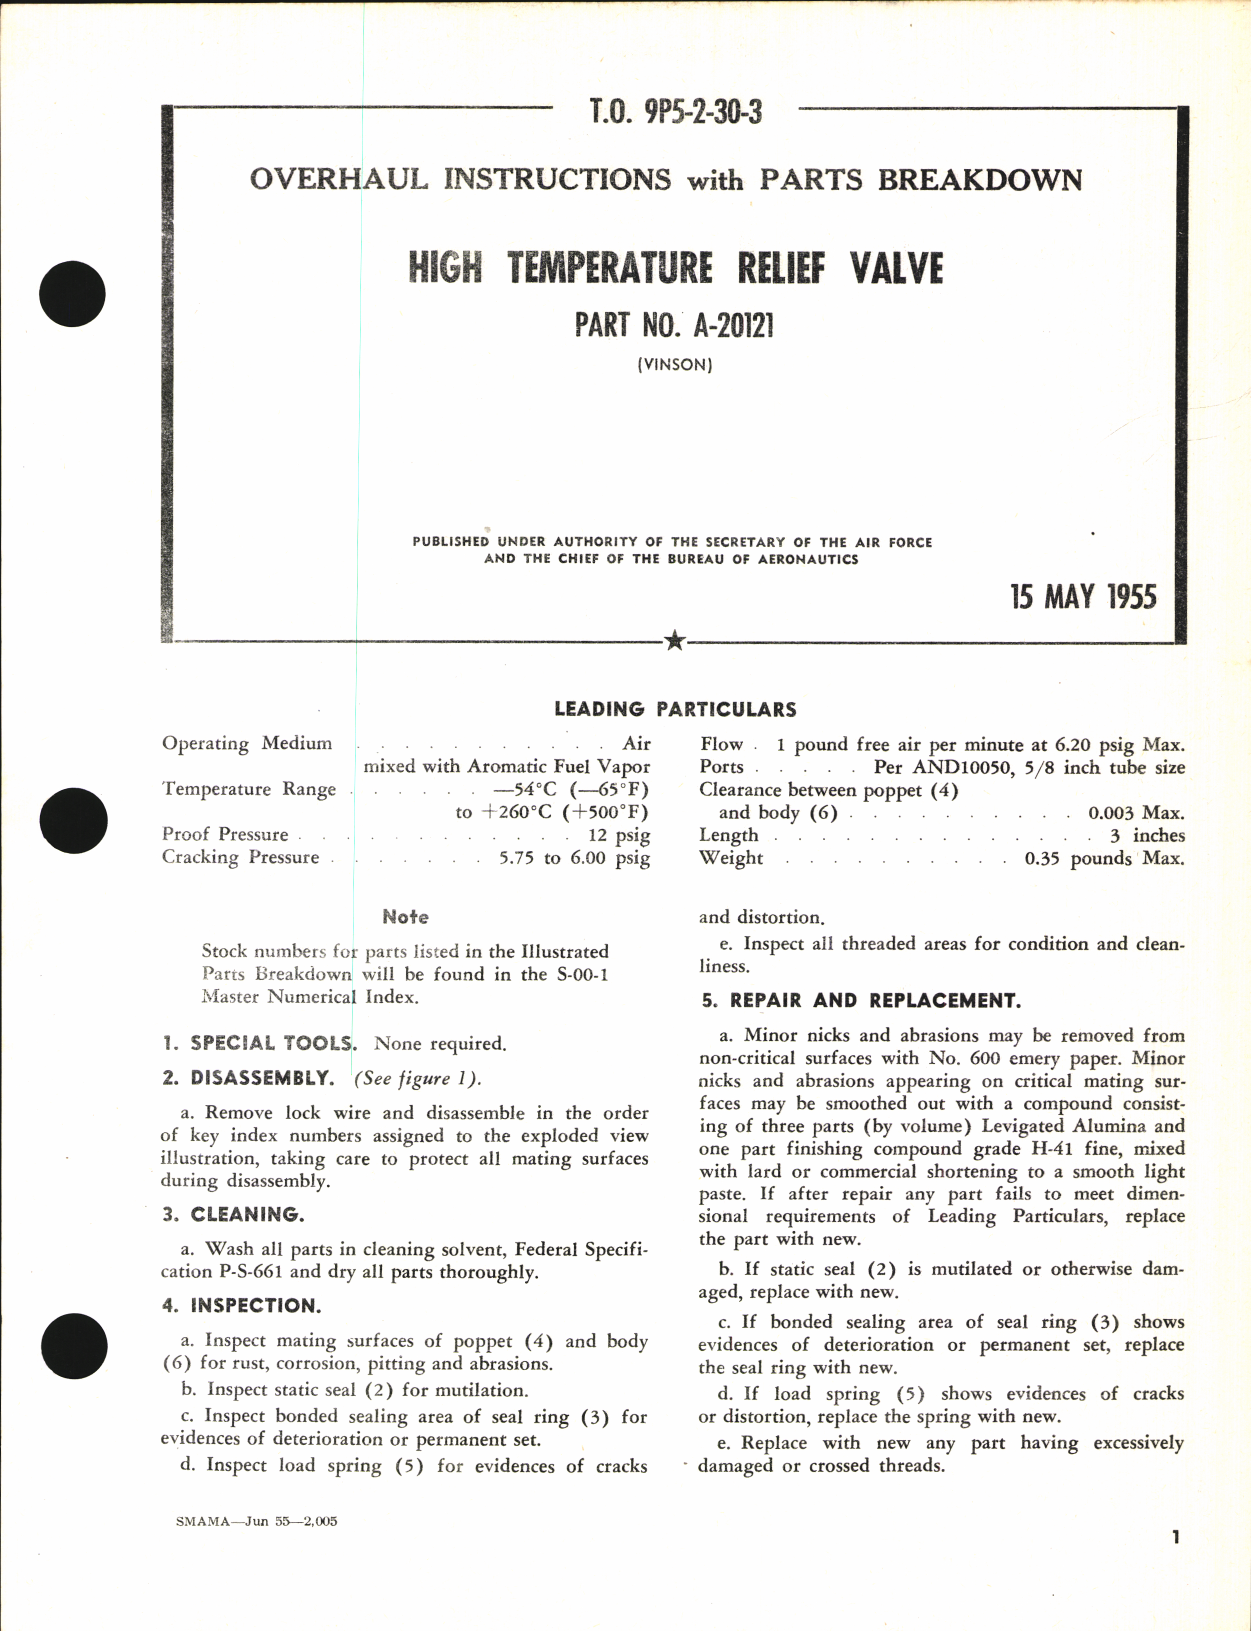 Sample page 1 from AirCorps Library document: Overhaul Instructions with Parts Breakdown for High Temperature Relief Valve Part No. A-20121